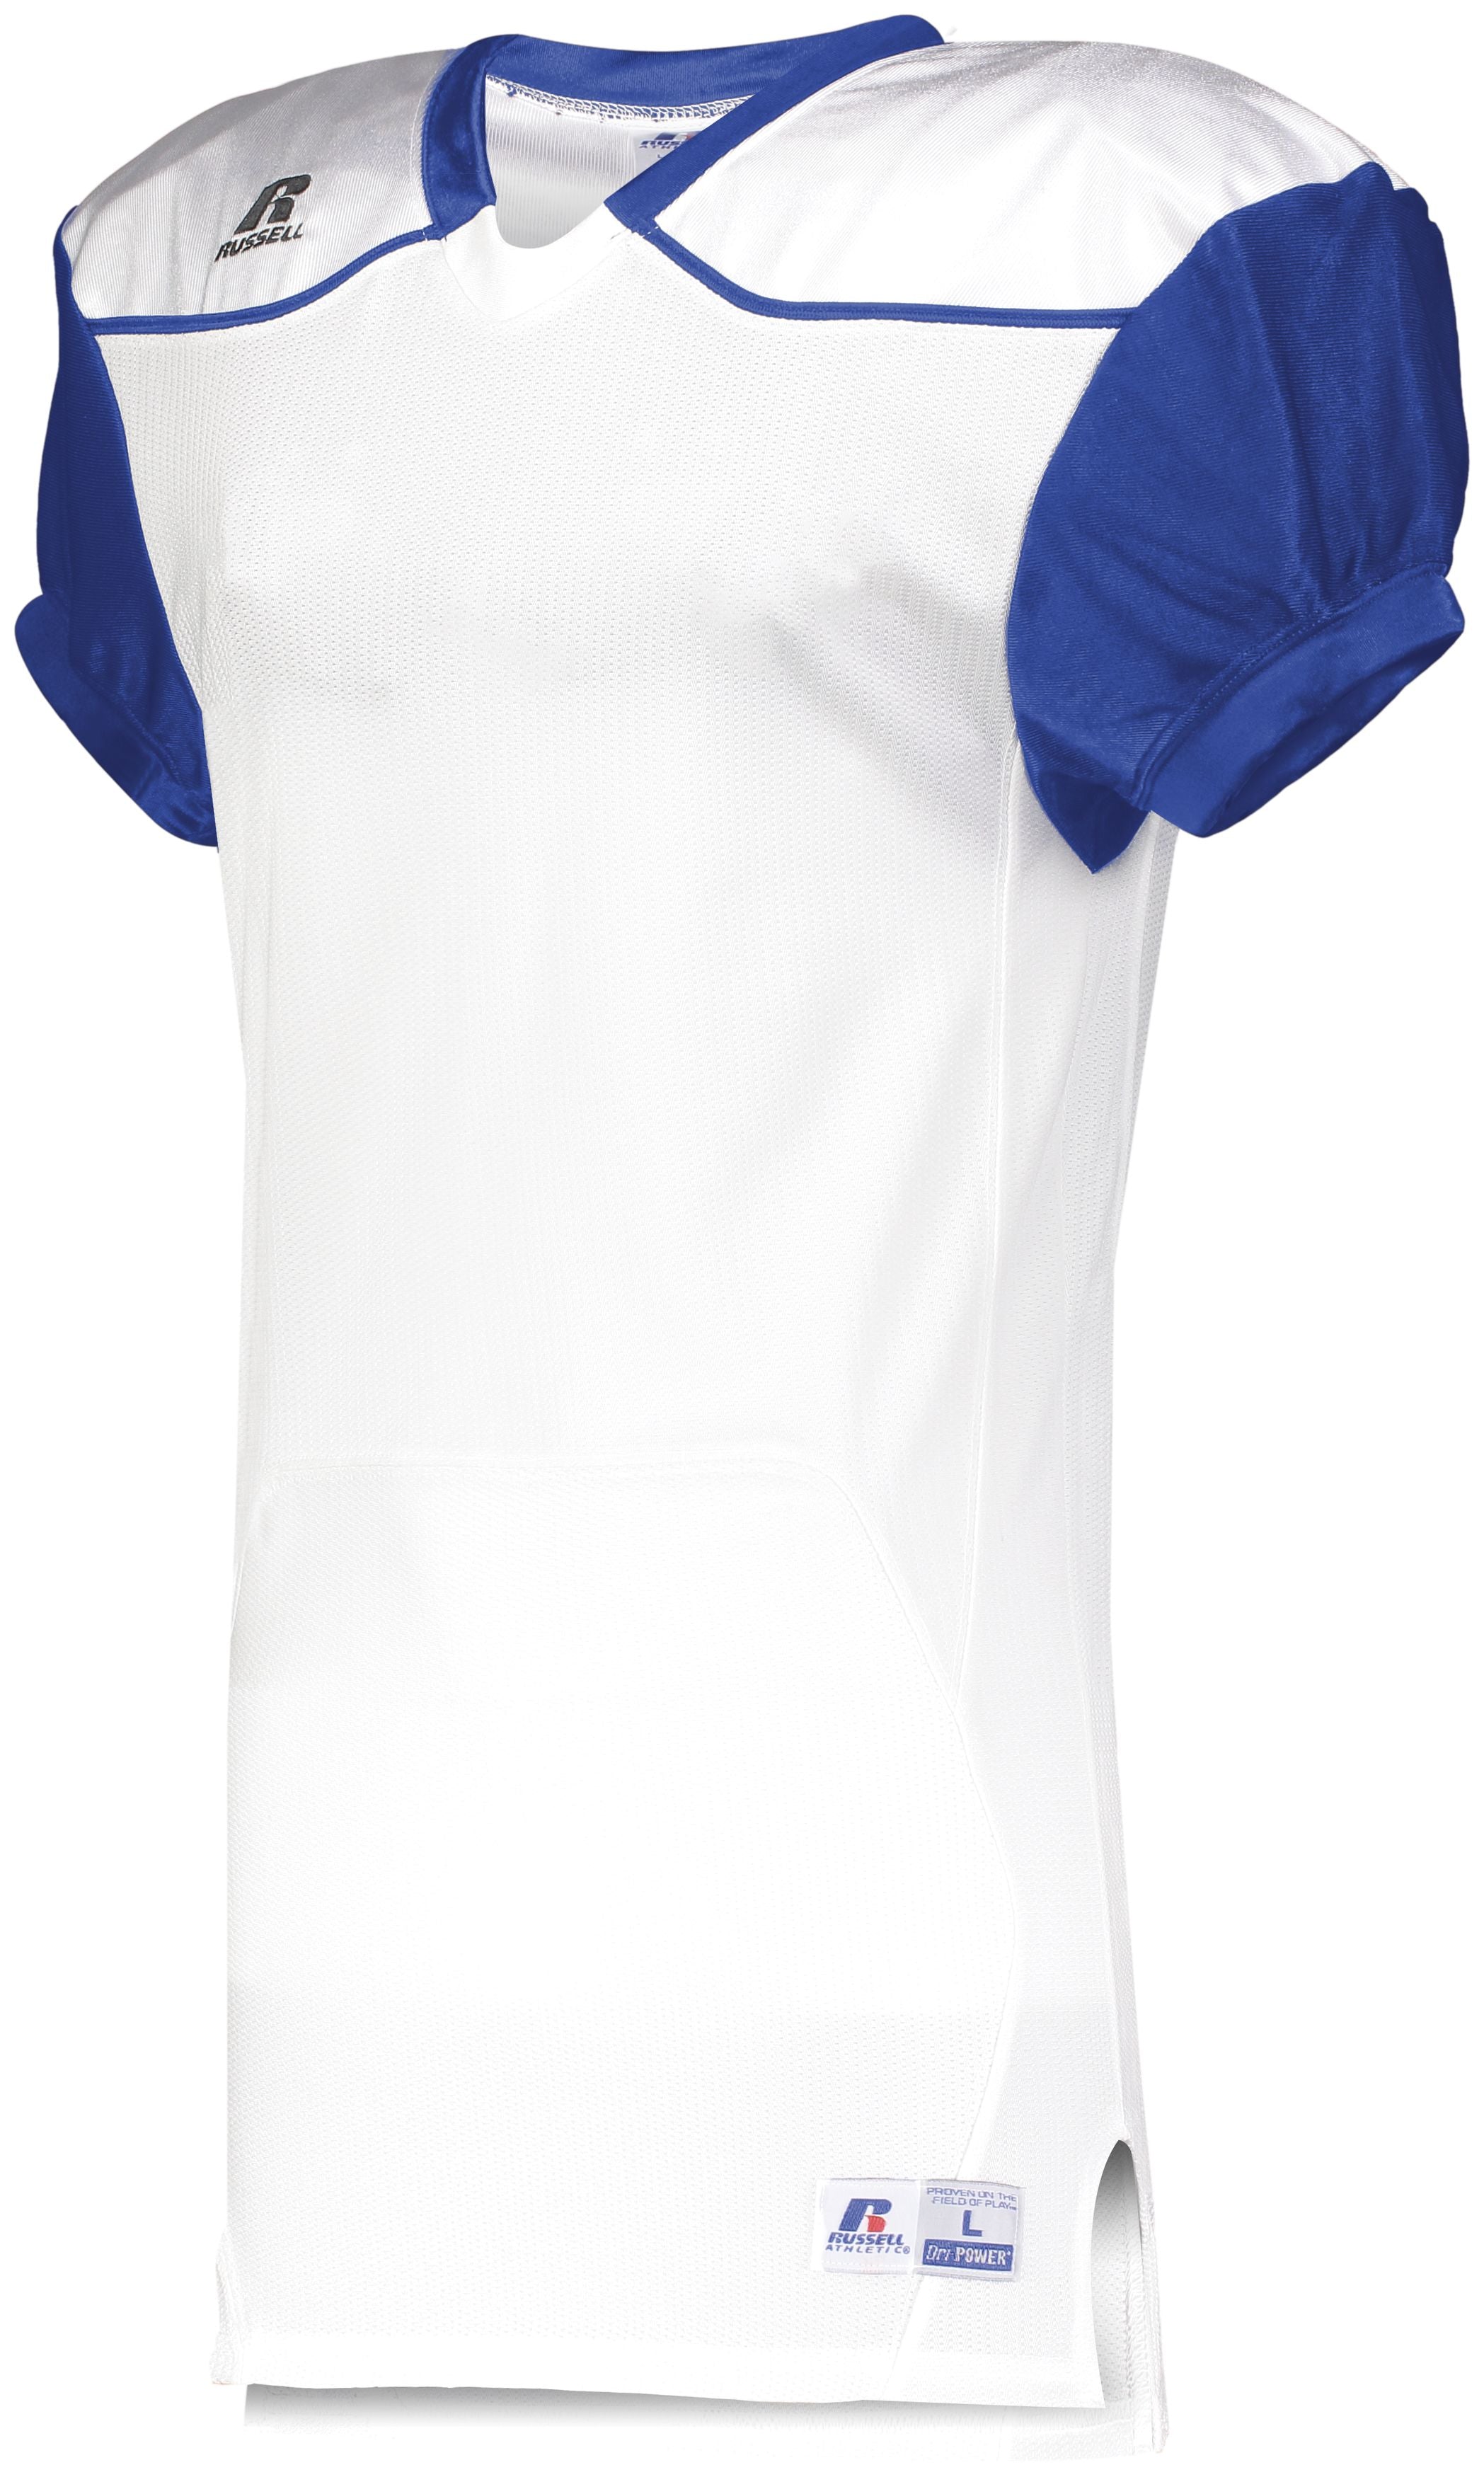 Russell Athletic Color Block Game Jersey (Away) in White/Royal  -Part of the Adult, Adult-Jersey, Football, Russell-Athletic-Products, Shirts, All-Sports, All-Sports-1 product lines at KanaleyCreations.com